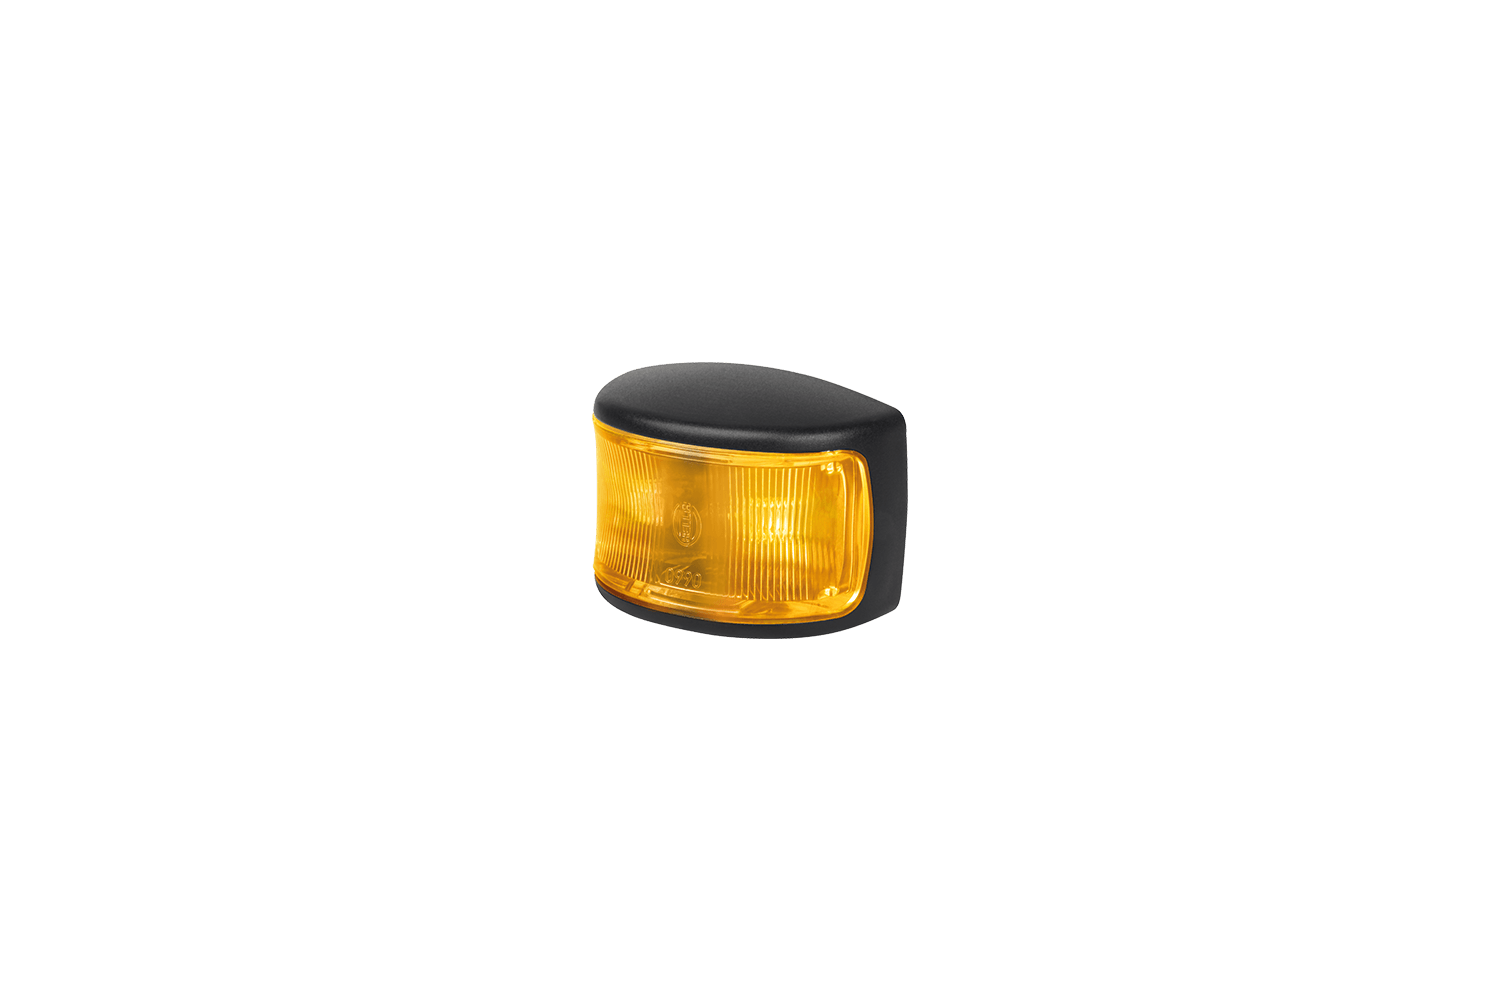 Supplementary Side Direction Indicator Lamp (Cat. 5) from Hella offered by Patlon